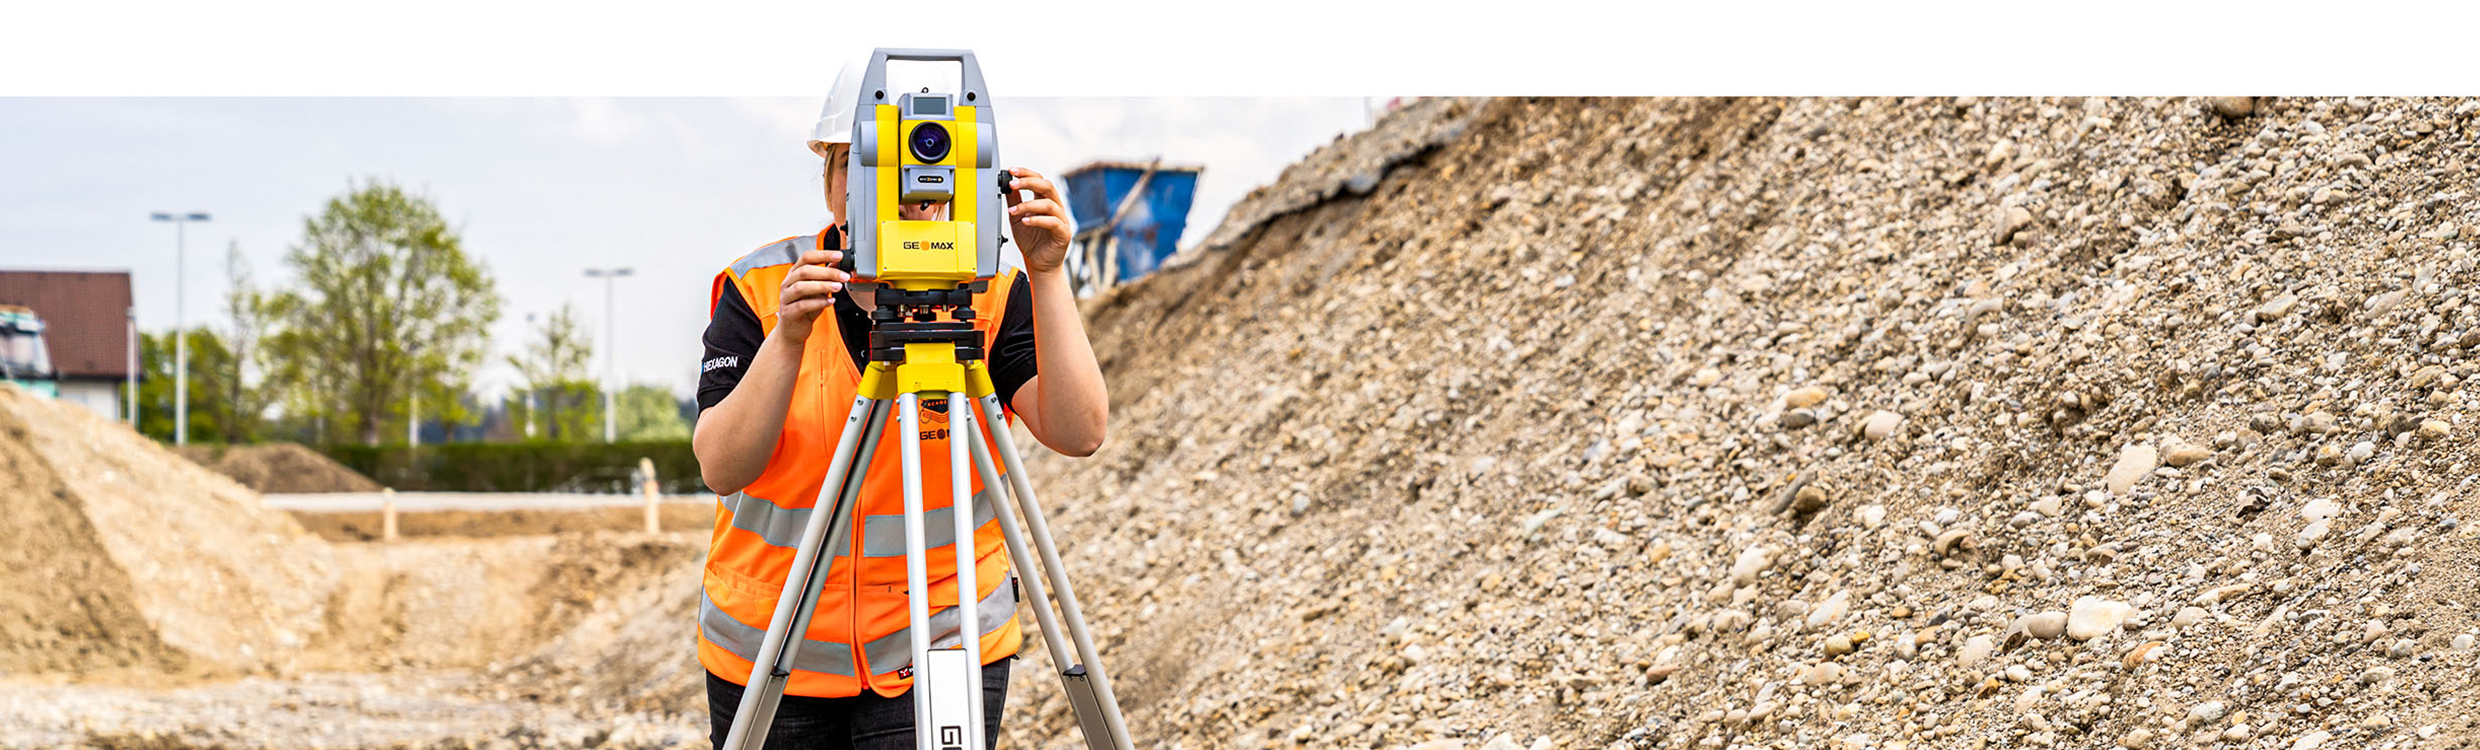 surveyor using the Geomax Zoom75 robotic total station out in the field